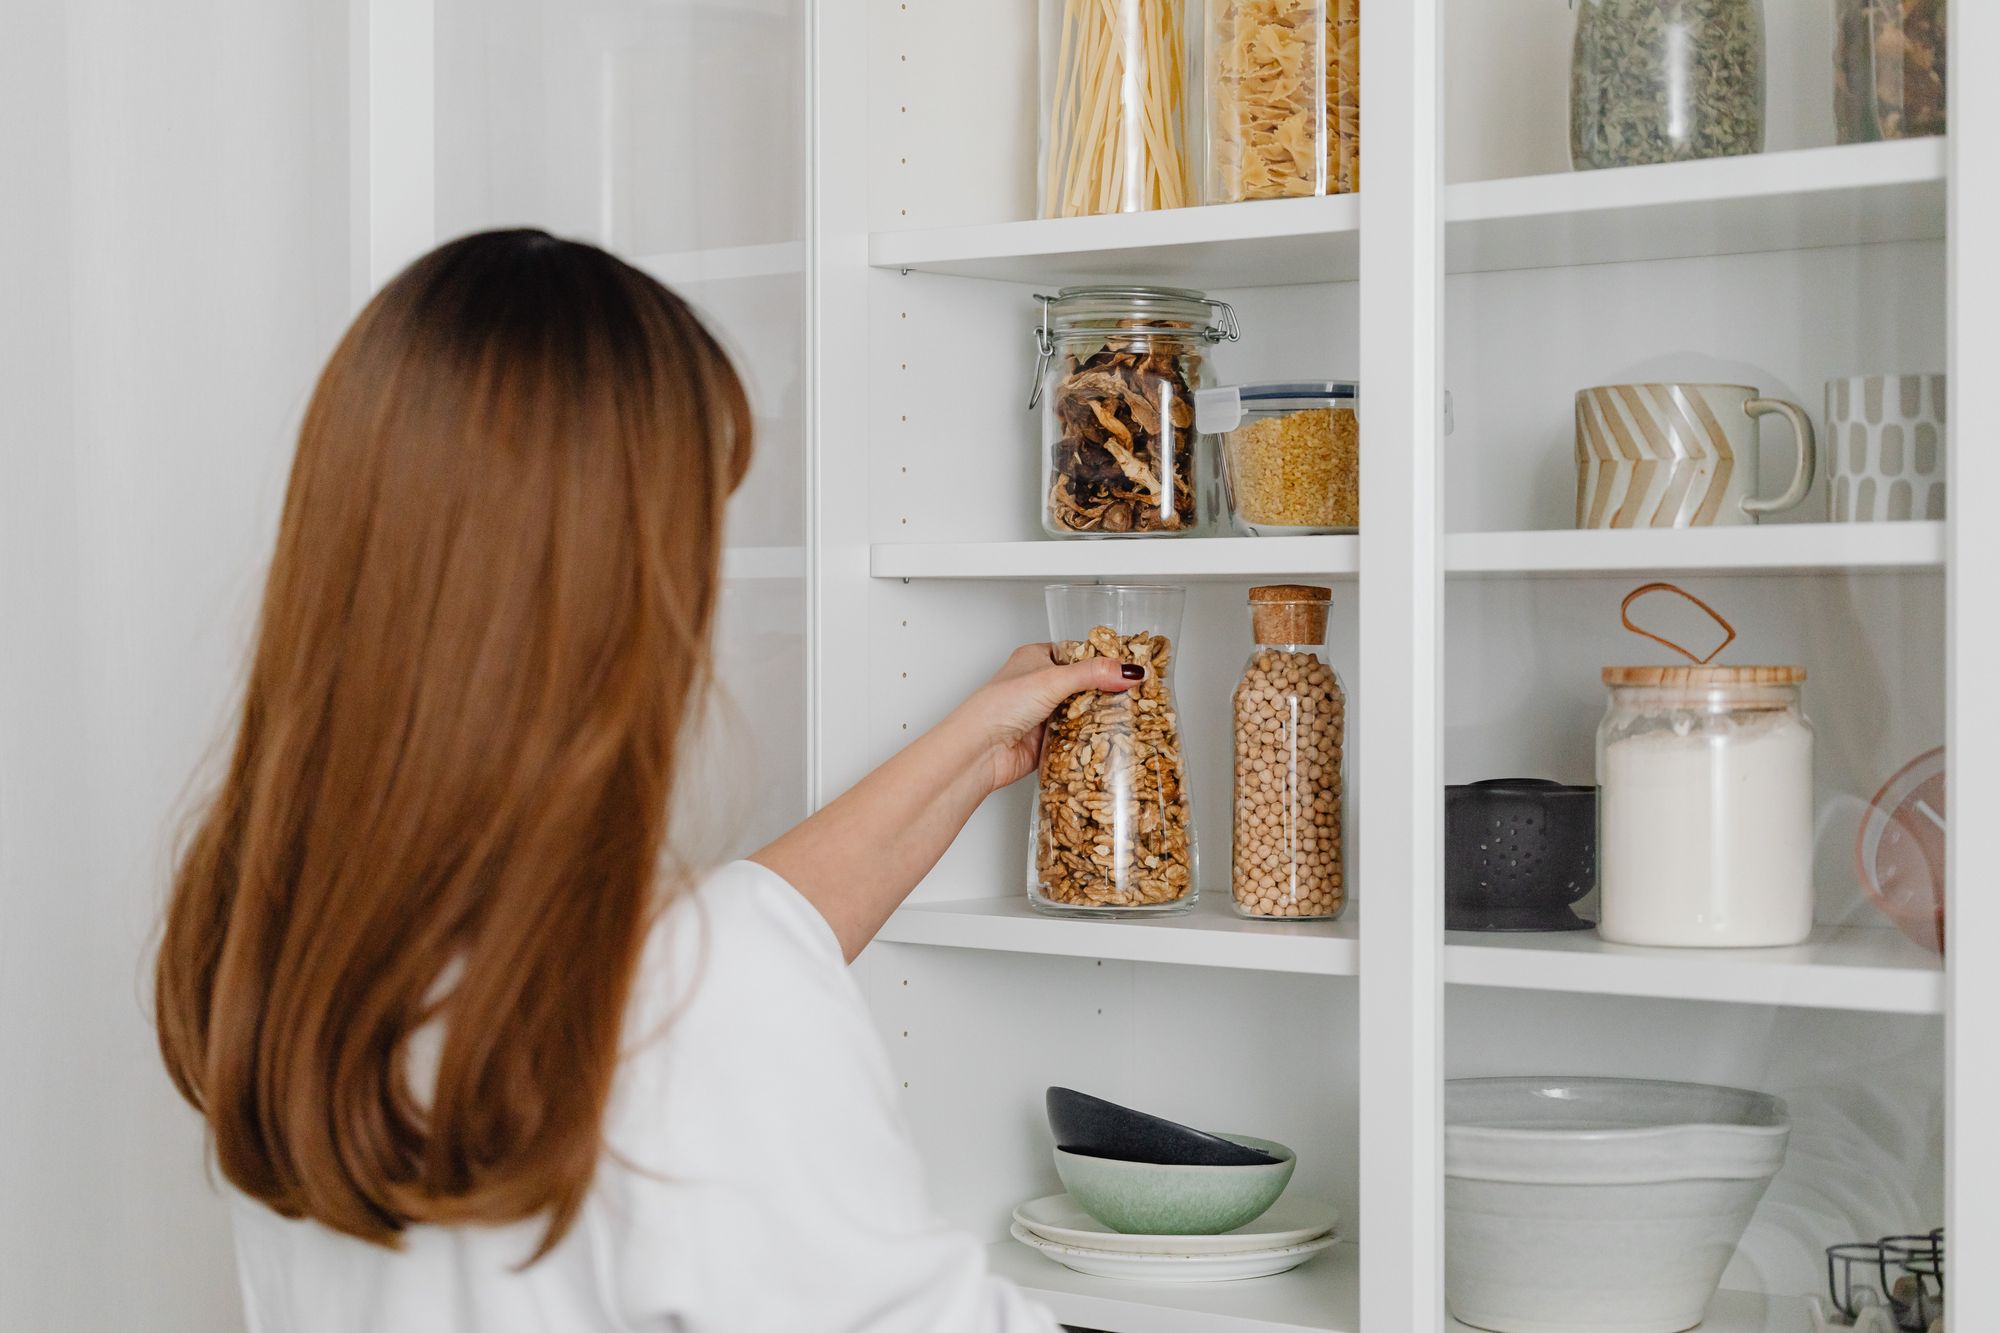 Woman in a white shirt standing in front of a kitchen cabinet and holding a glass jar